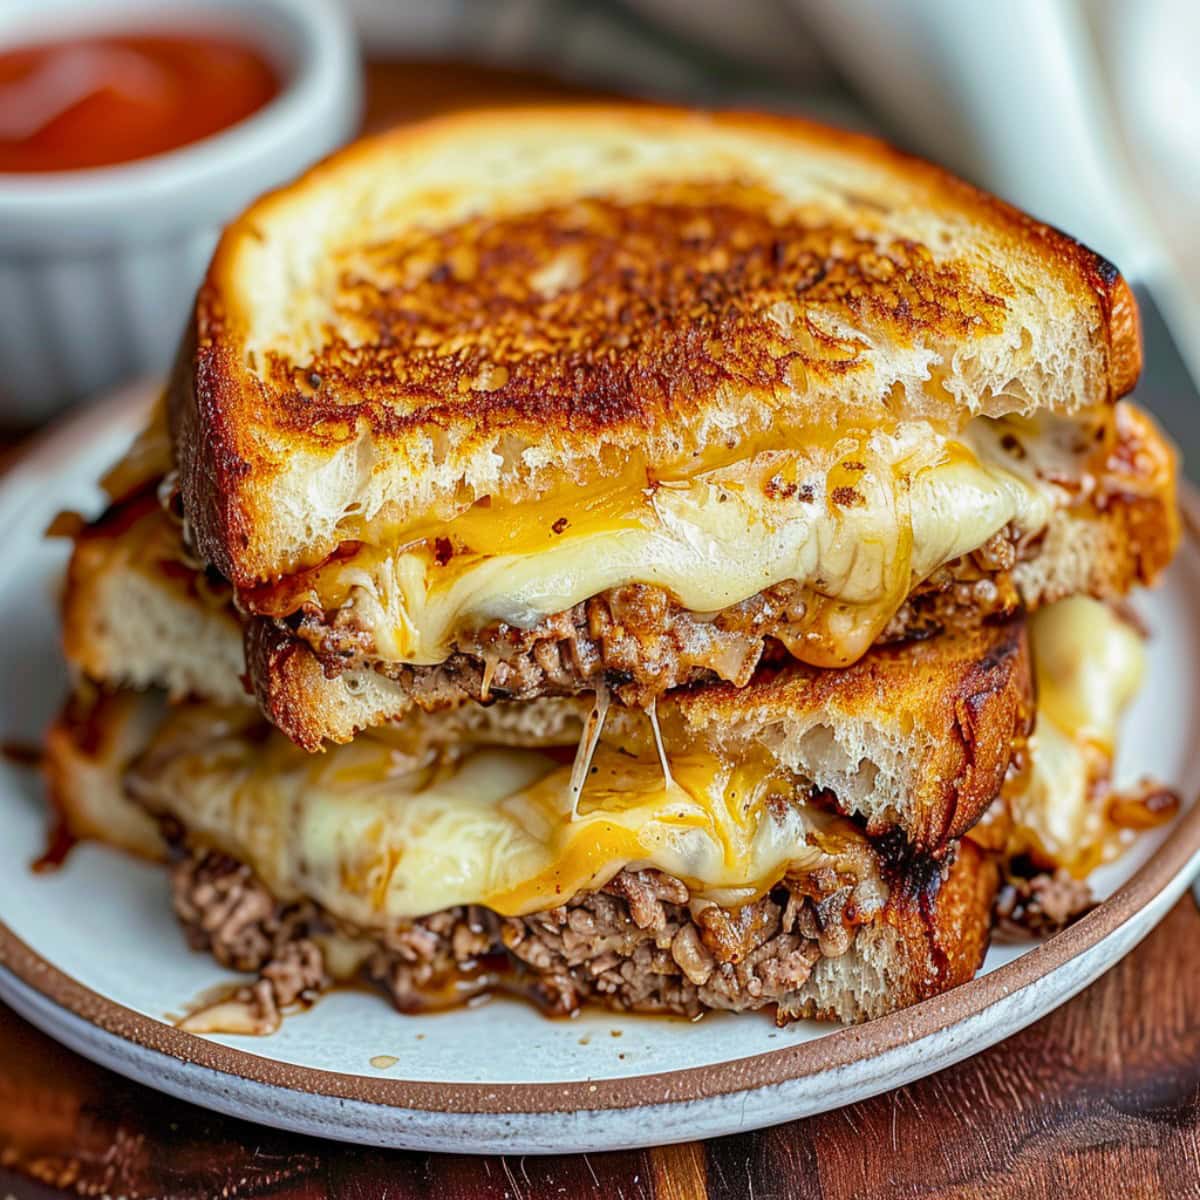 Two Halves of a Patty Melt Stacked on a White Plate with Gooey Cheese, Juicy Burger Meat, and Crispy Bread